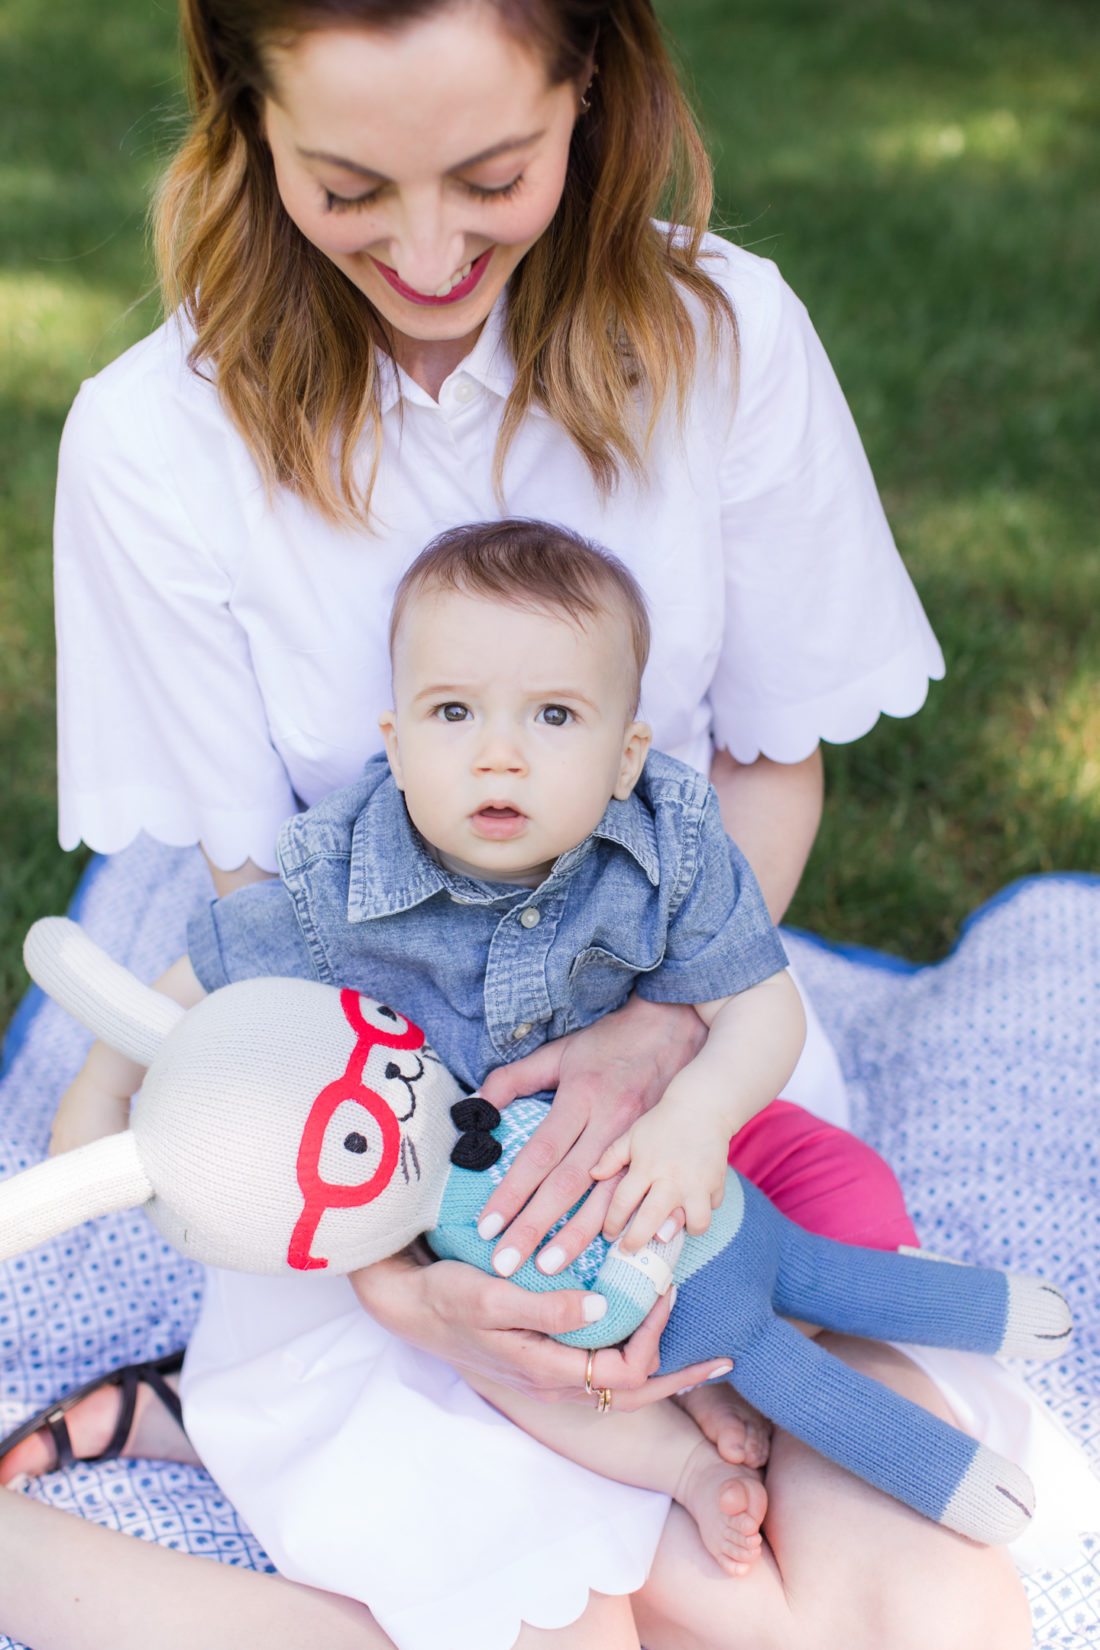 Eva Amurri Martino of lifestyle and motherhood blog Happily Eva After relaxes on a picnic blanket with her two children Marlowe and Major